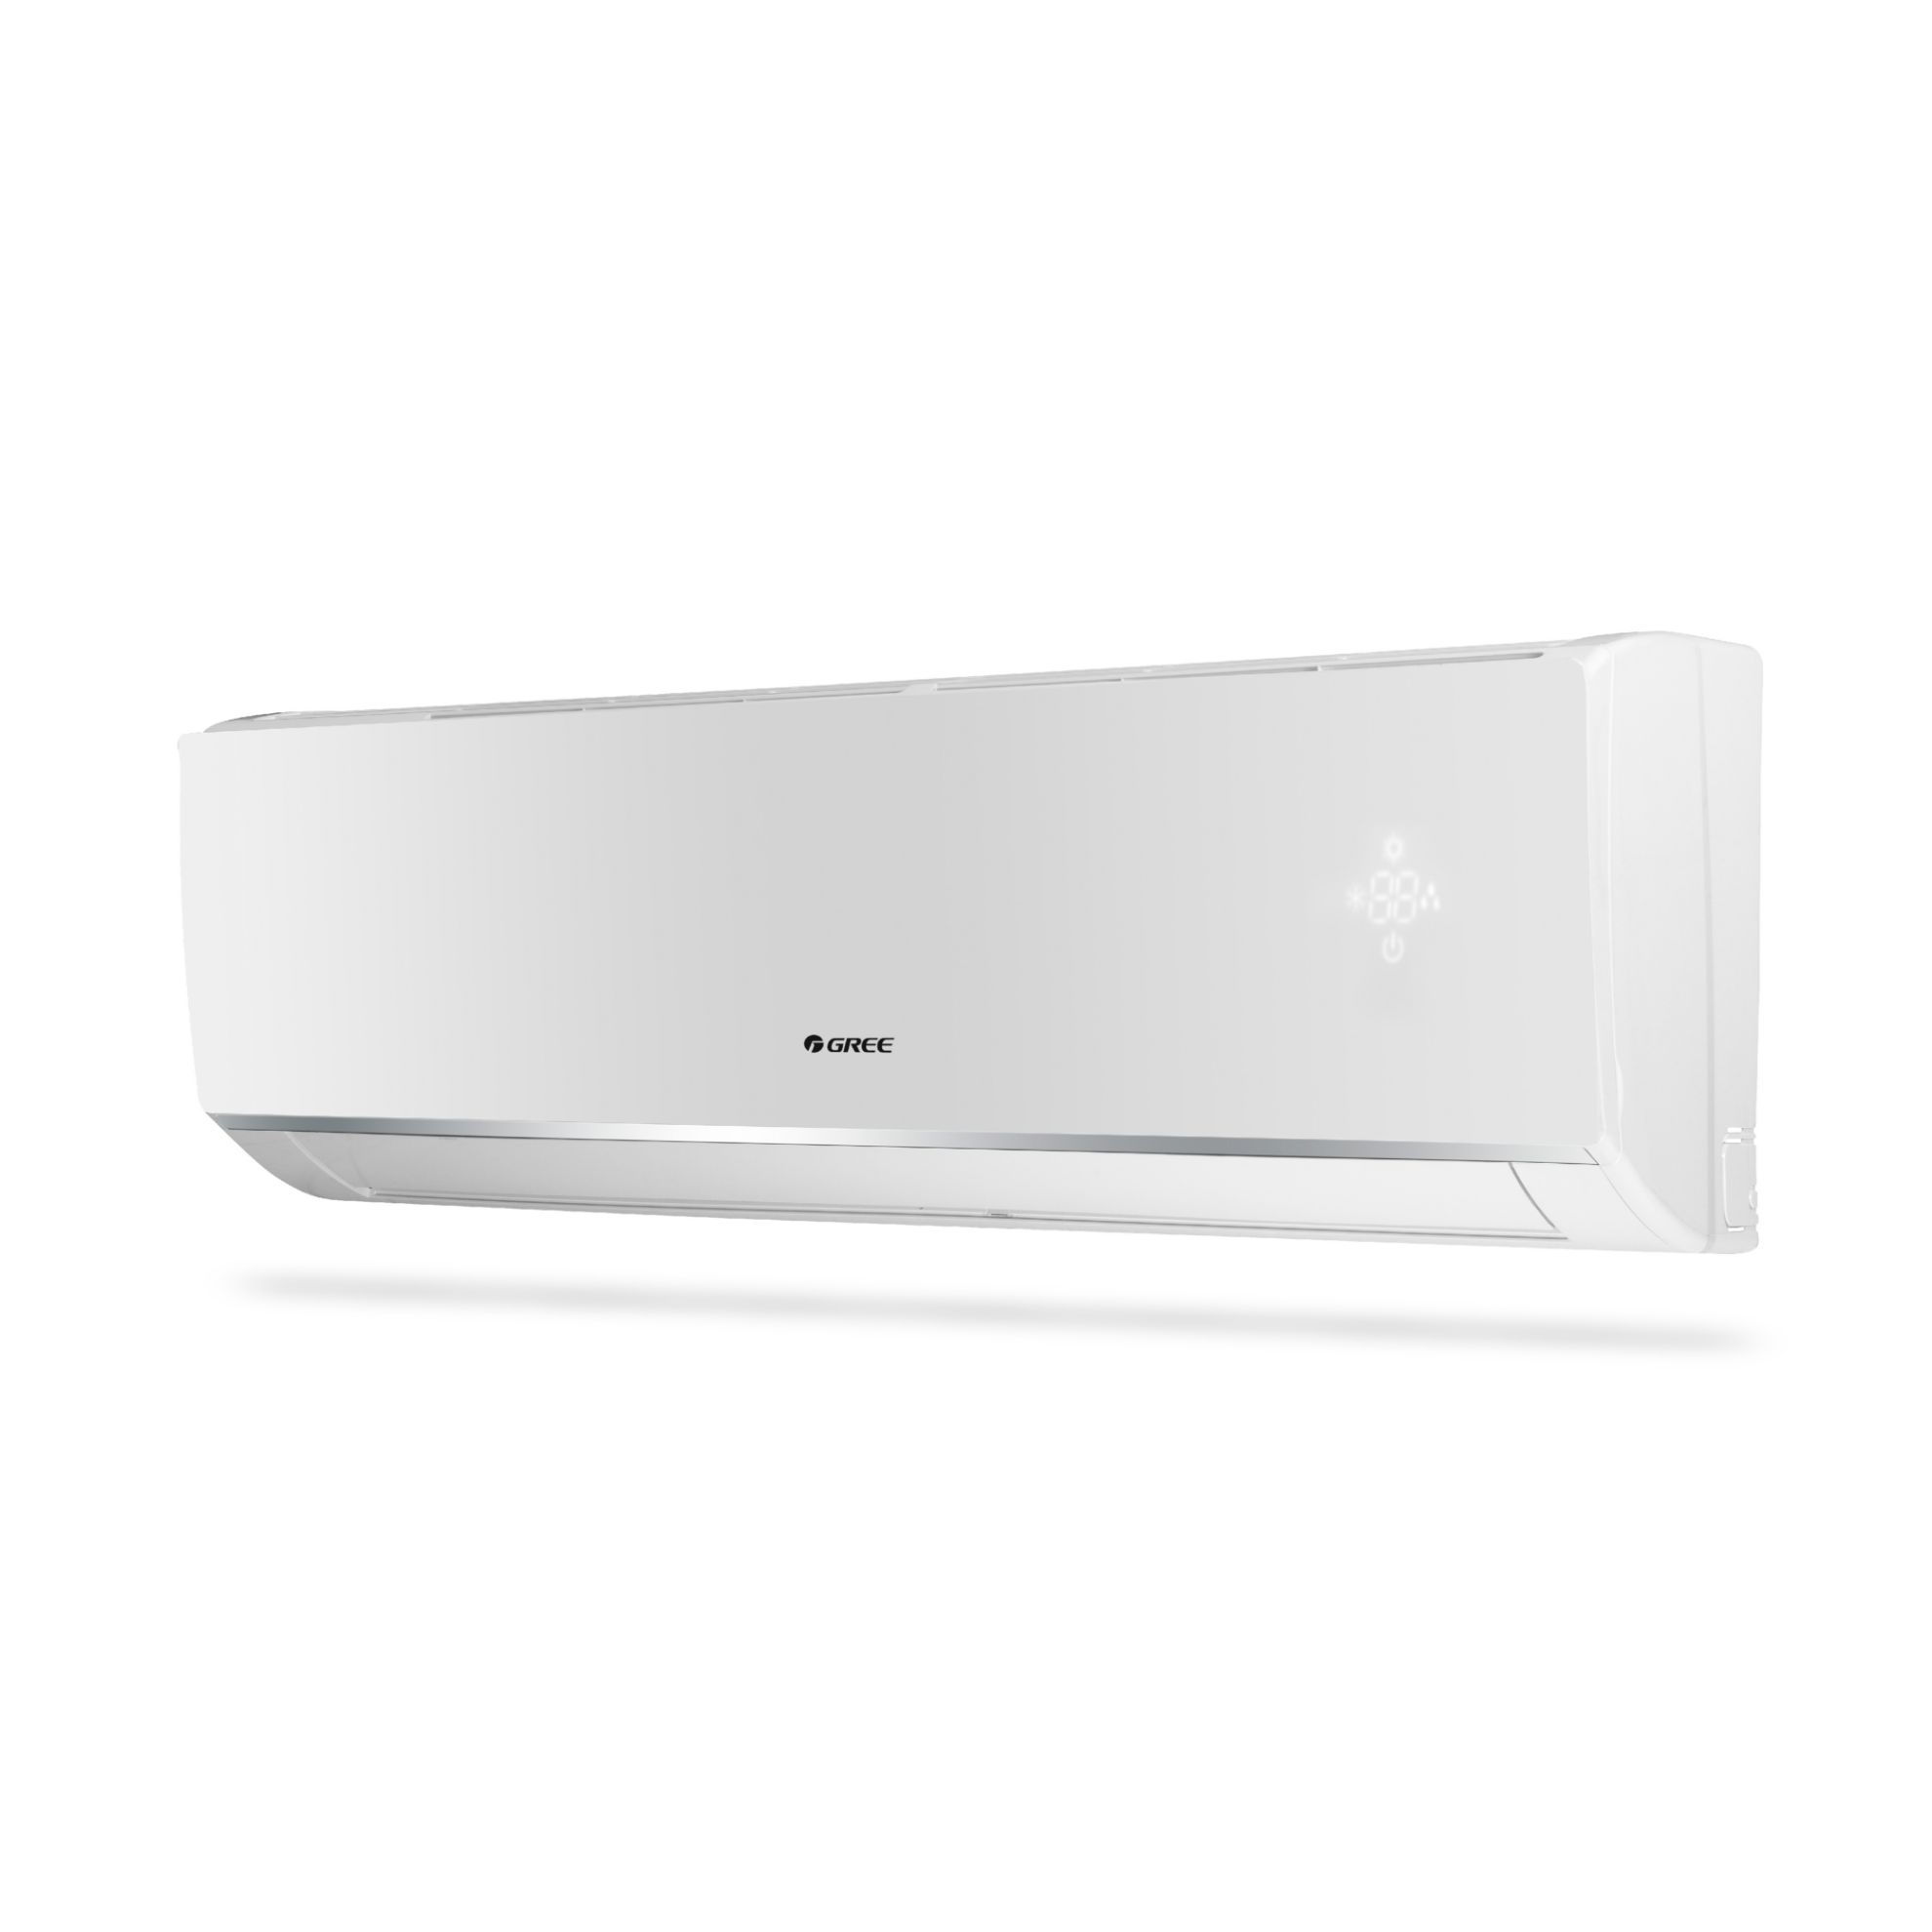 Picture of Gree - Lomo-P25C3 - 2.0 Ton|Reciprocating|Wall Split AC